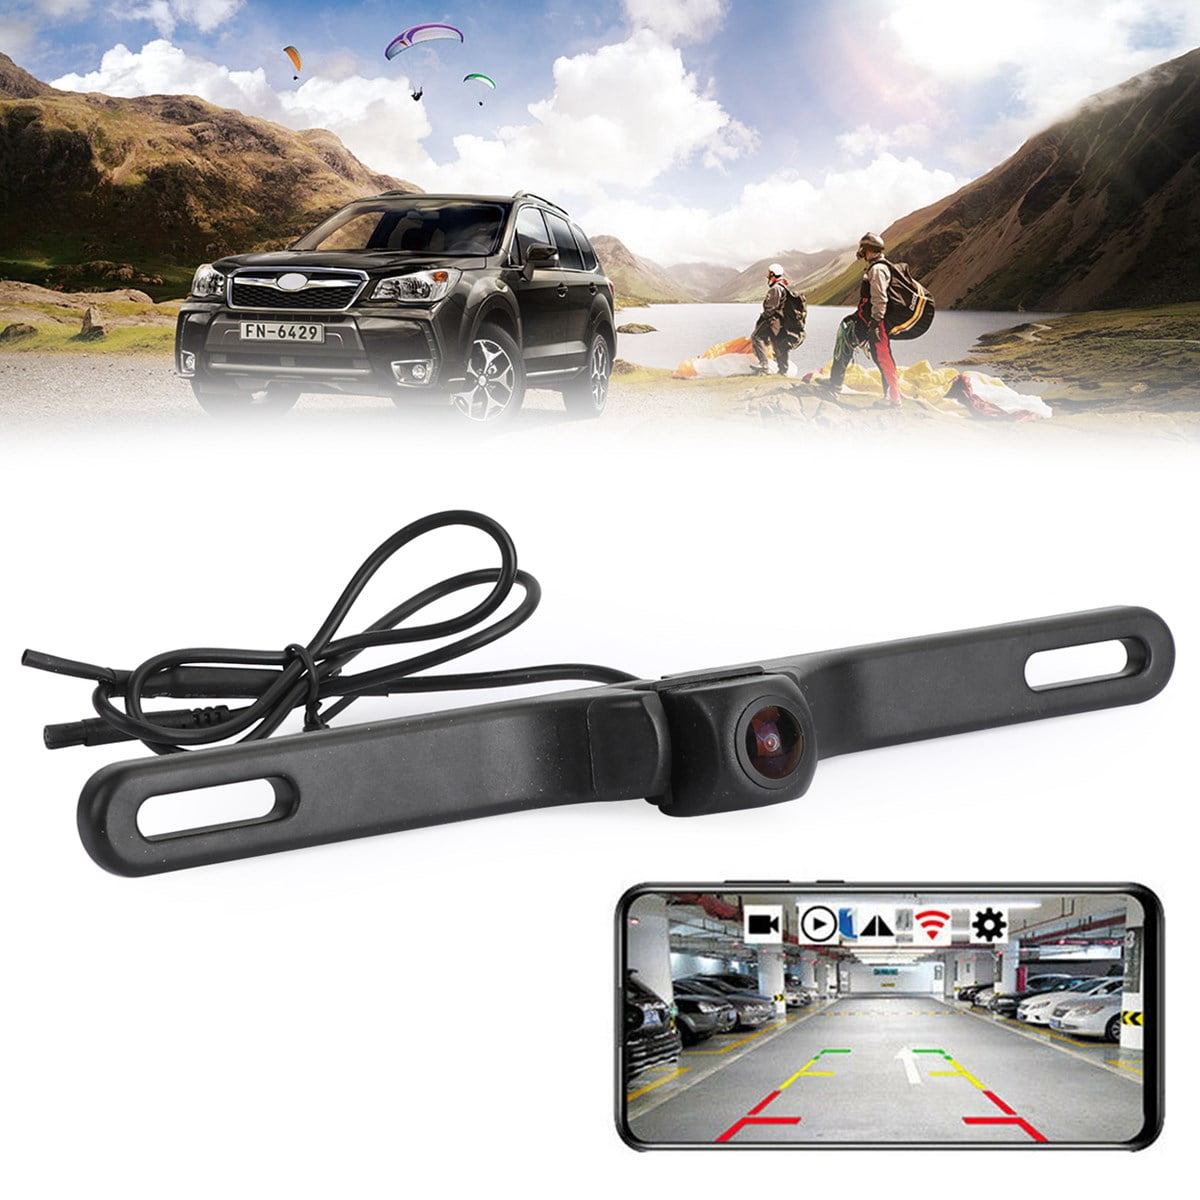 Waterproof WiFi Car SUV Backup Camera Video Rearview Transmitter iPhone Android 